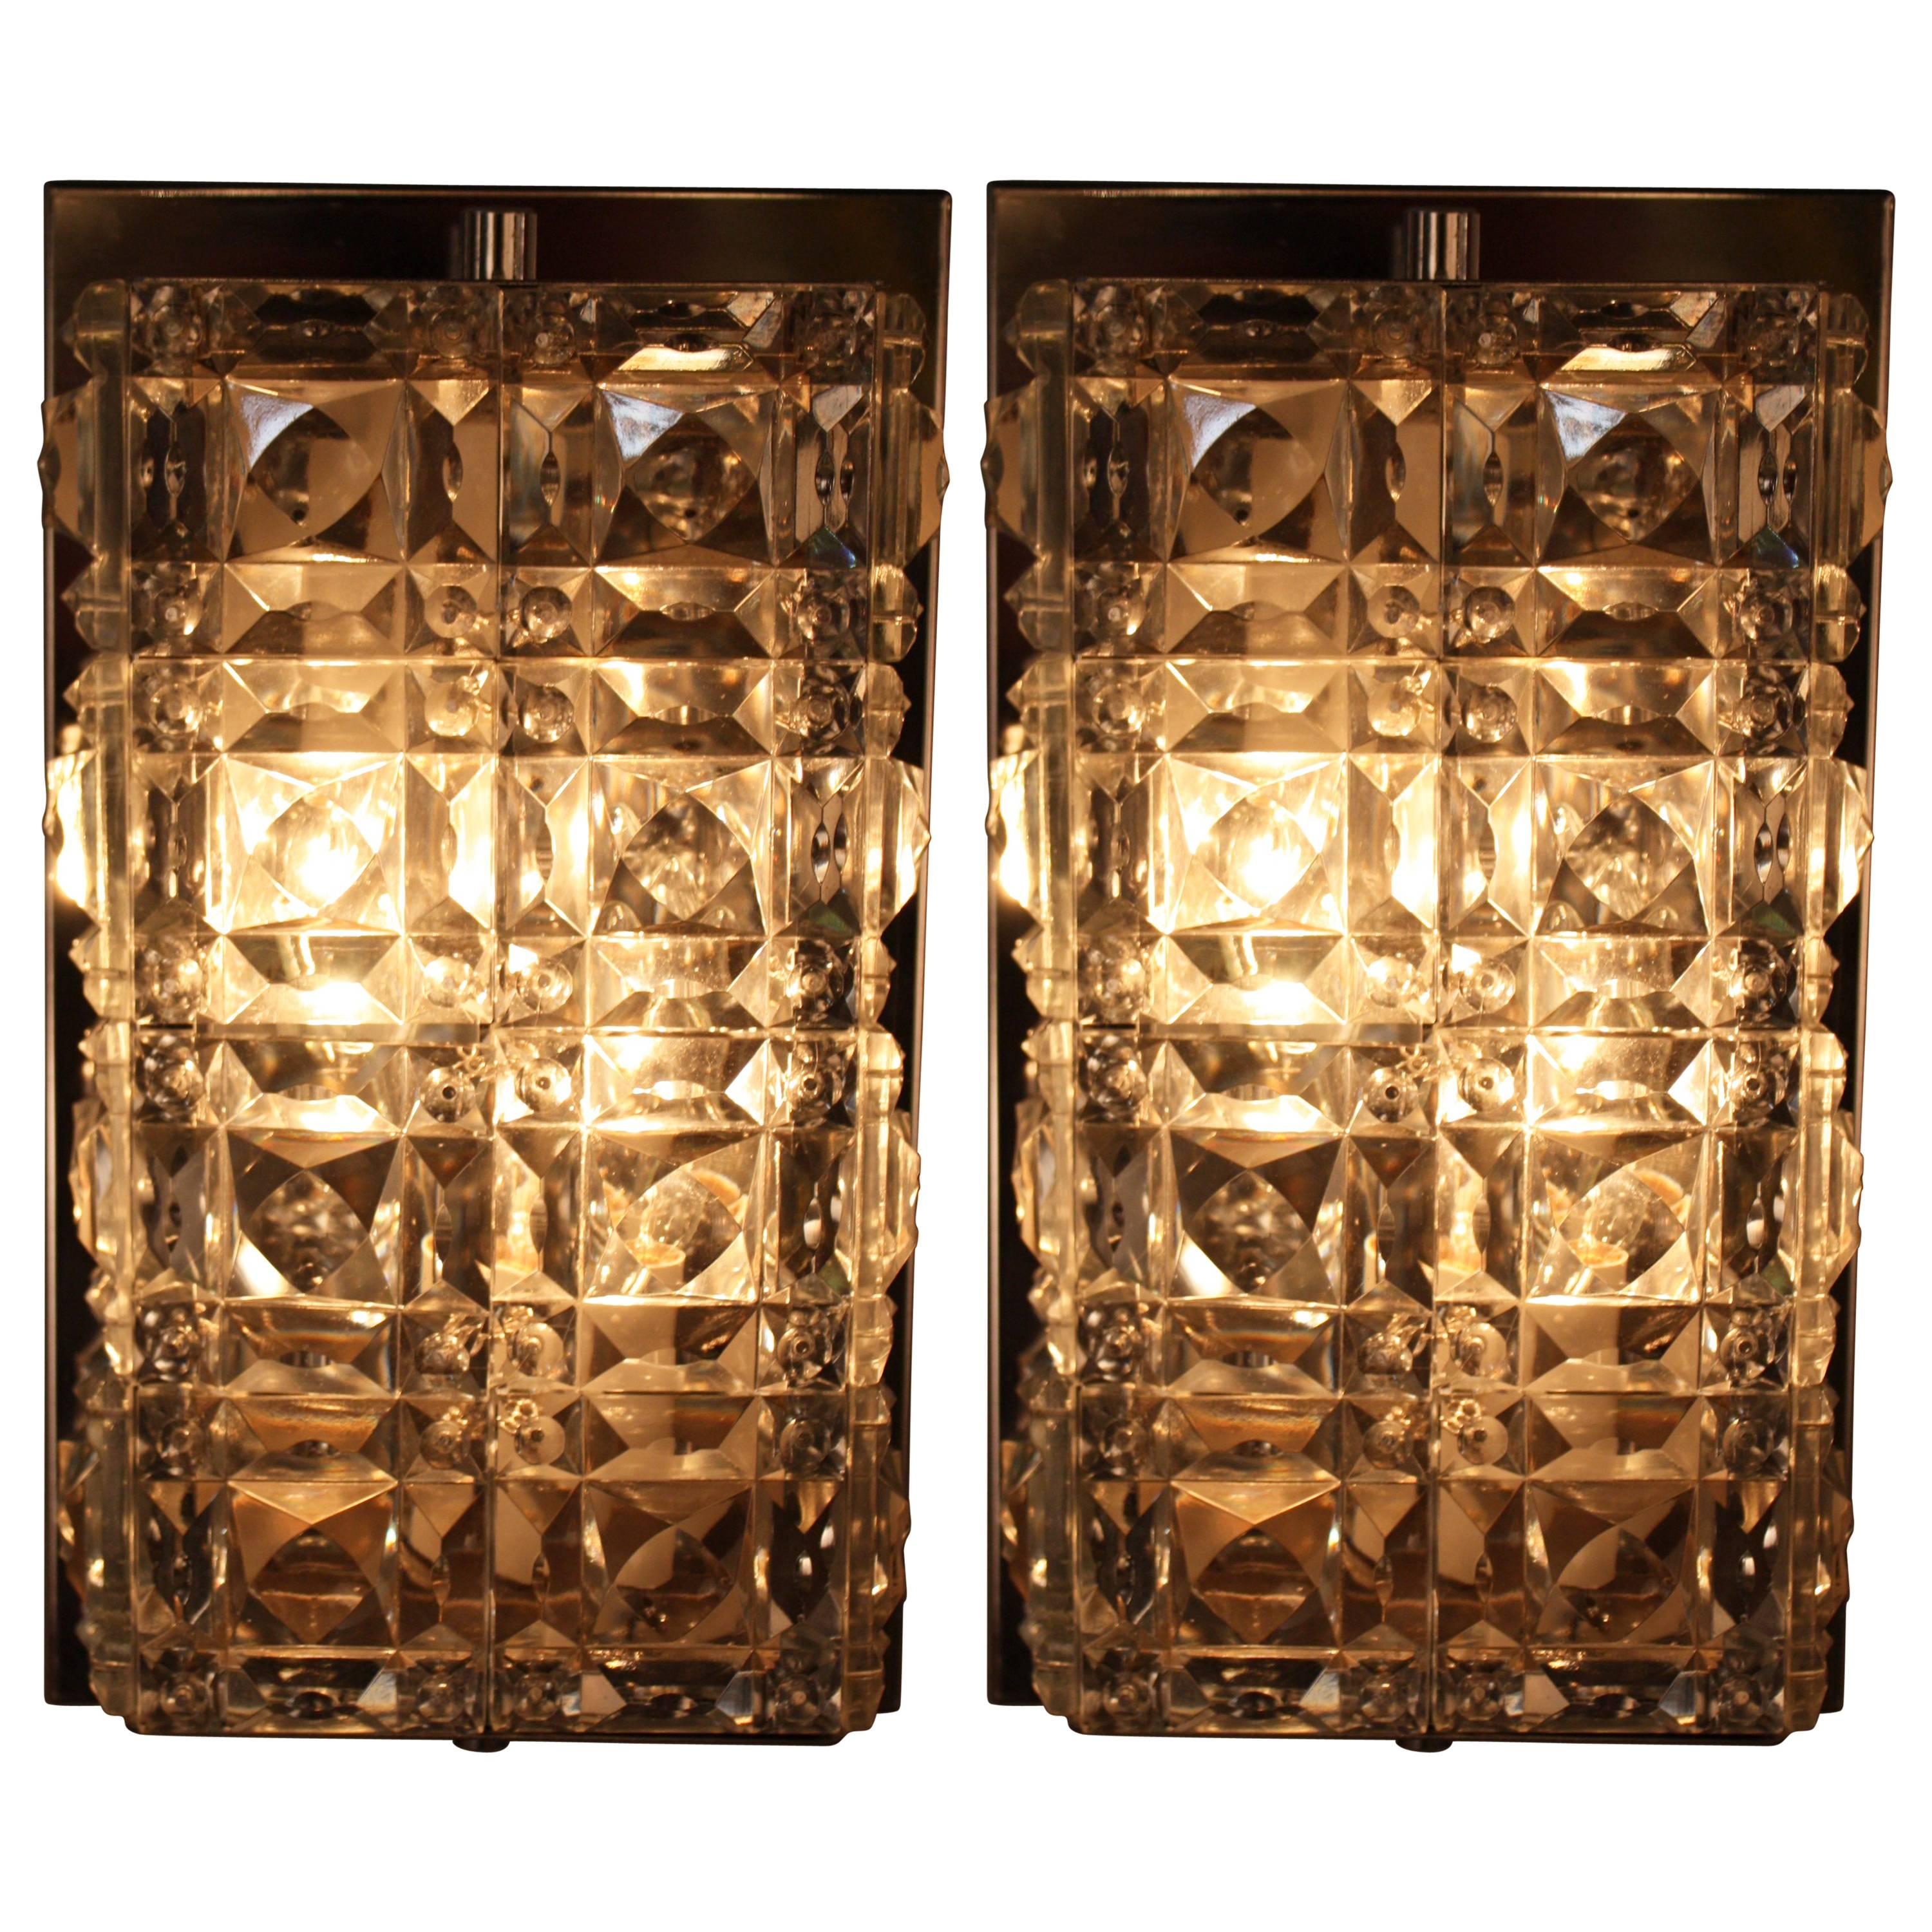 Pair of 1970s Crystal and Chrome Wall Sconces by Kinkeldey